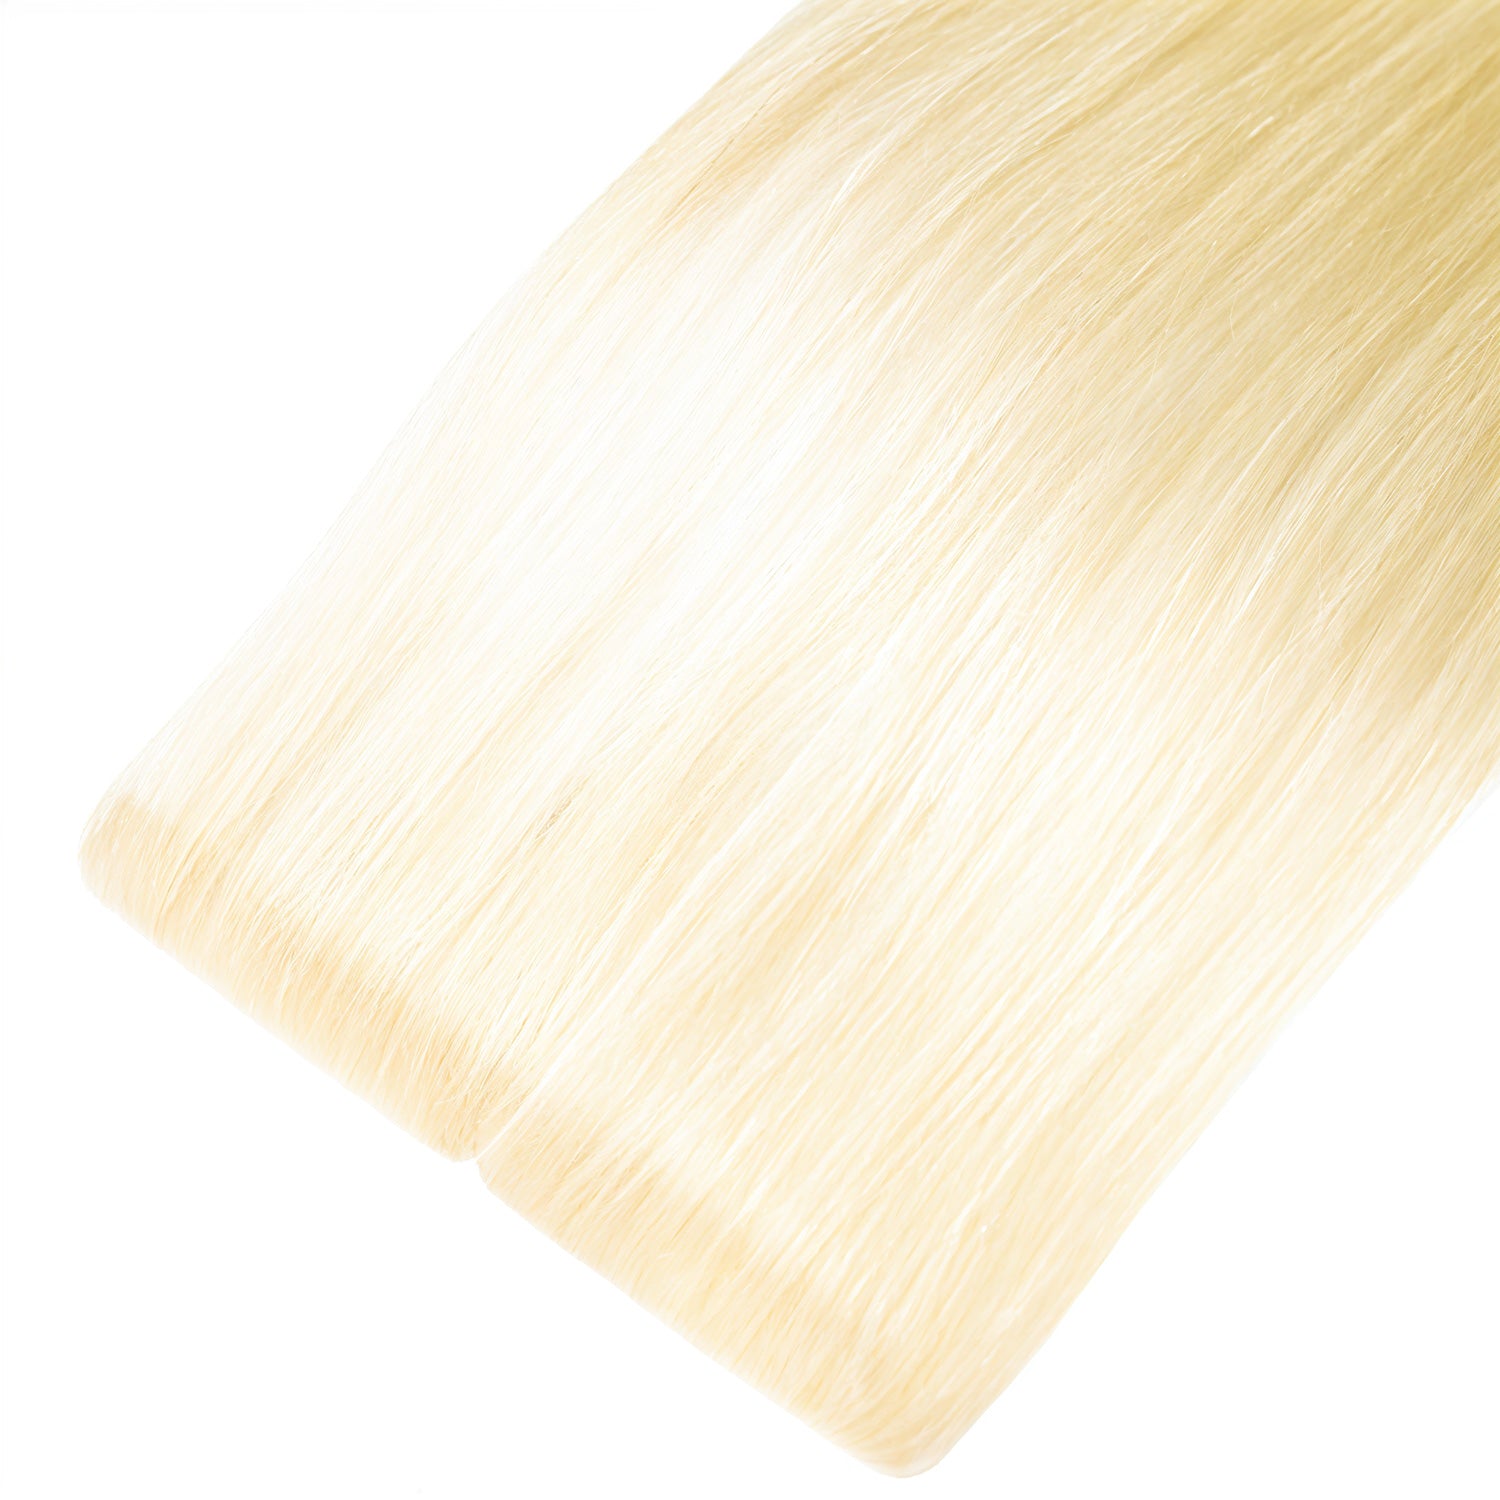 Achieve a natural look with high-quality Tape Hair extensions. These extensions blend seamlessly with your natural hair, adding both length and volume for a flawless appearance